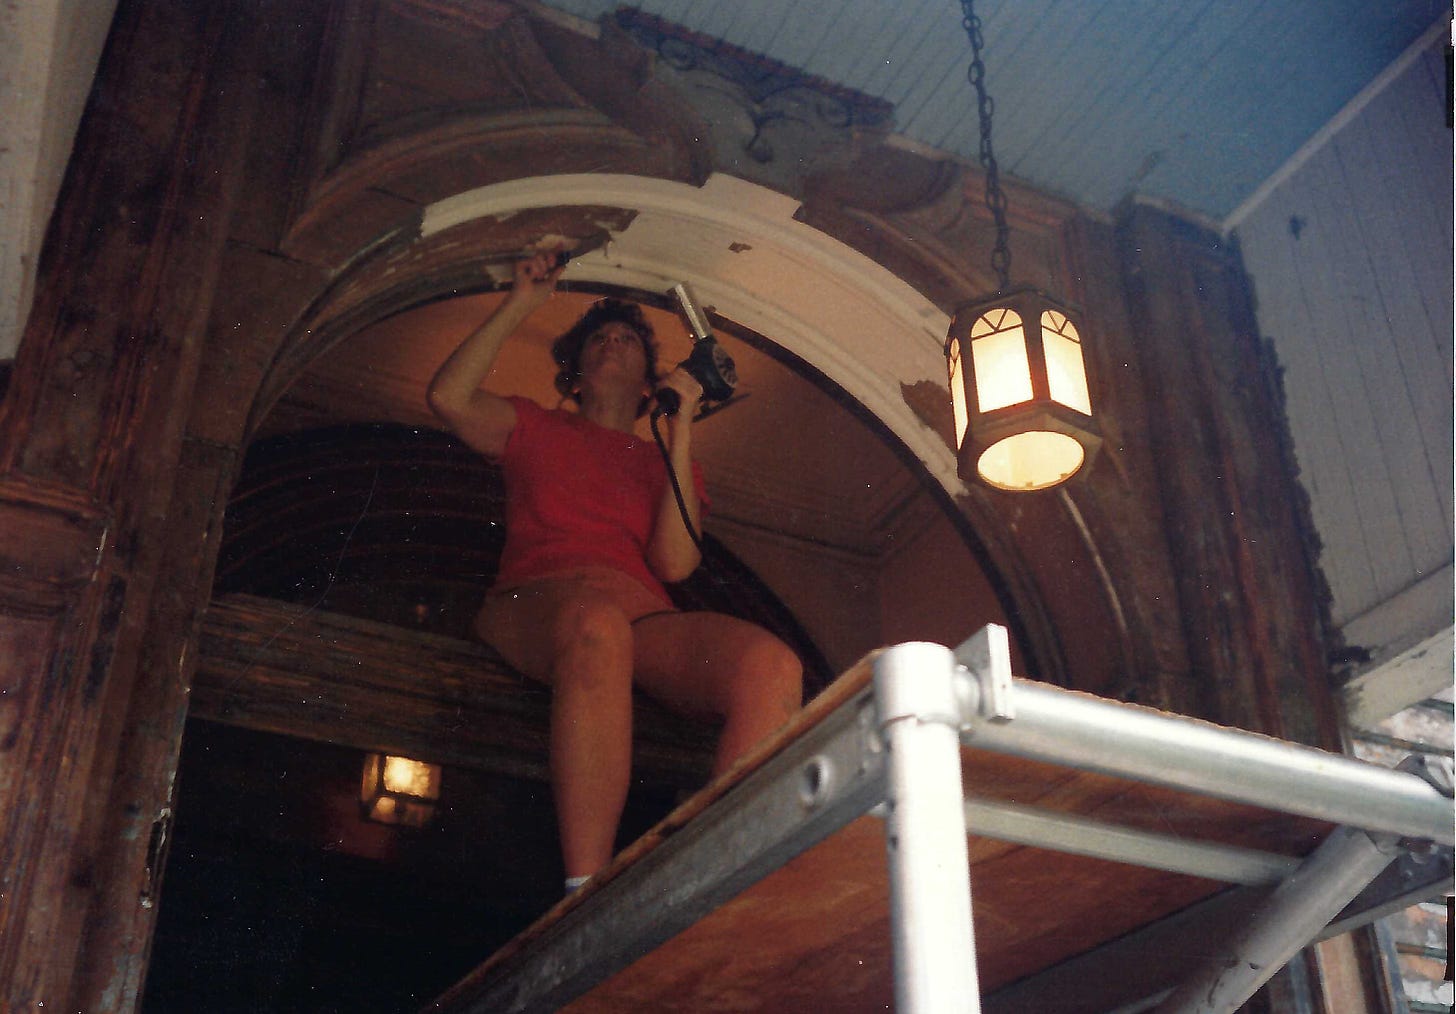 Woman sitting on scaffolding holding a heat gun. She is scraping paint from the archway above her.